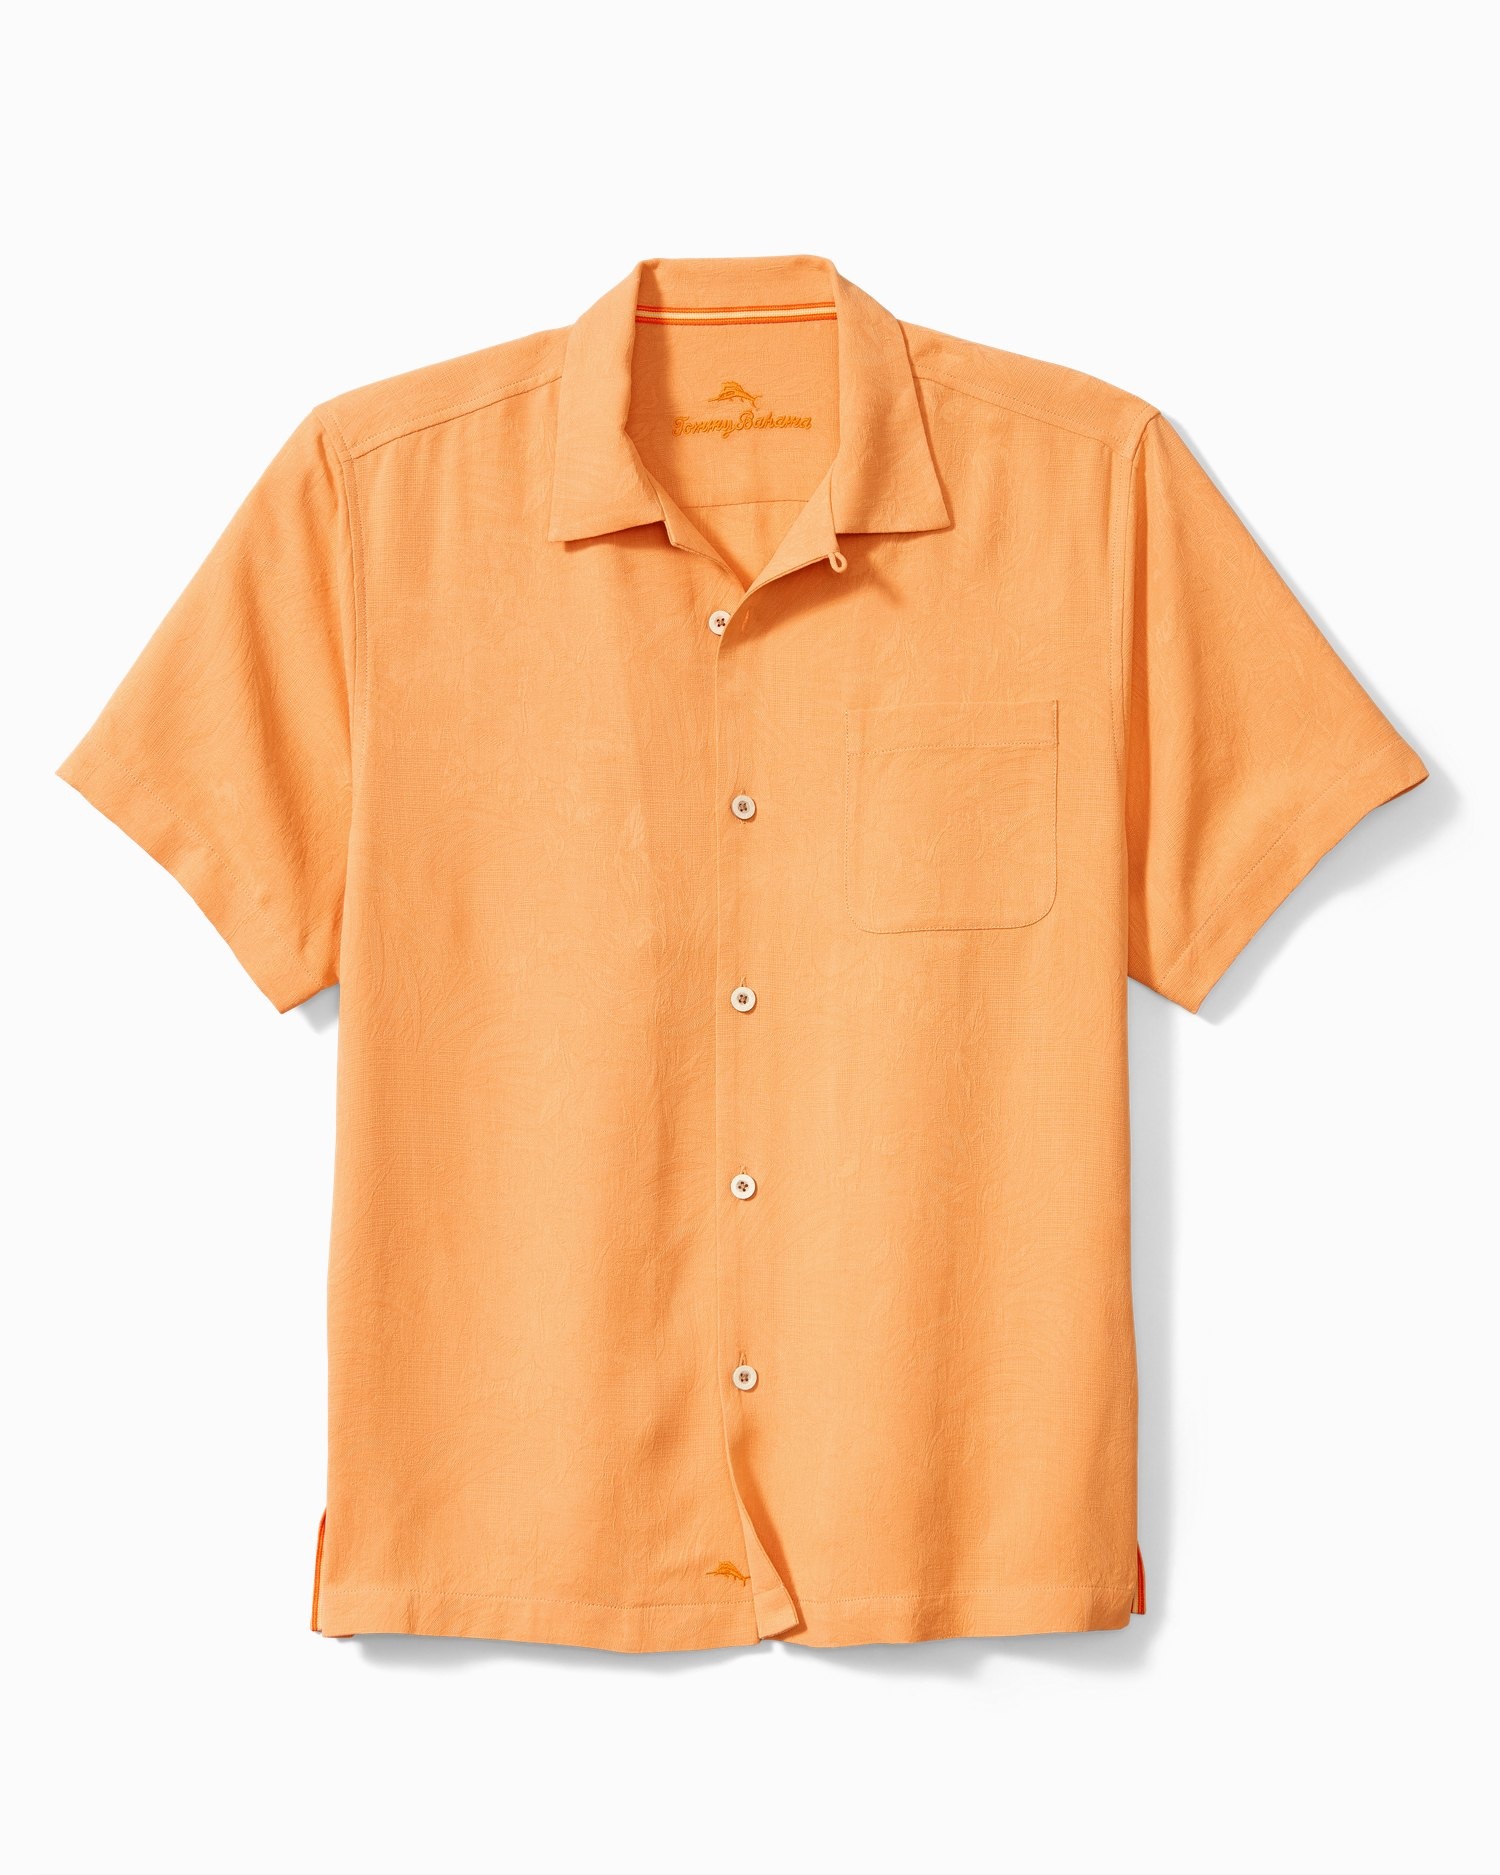 Tommy Bahama Nova Wave Boca - Adventures In Paradise Outfitters